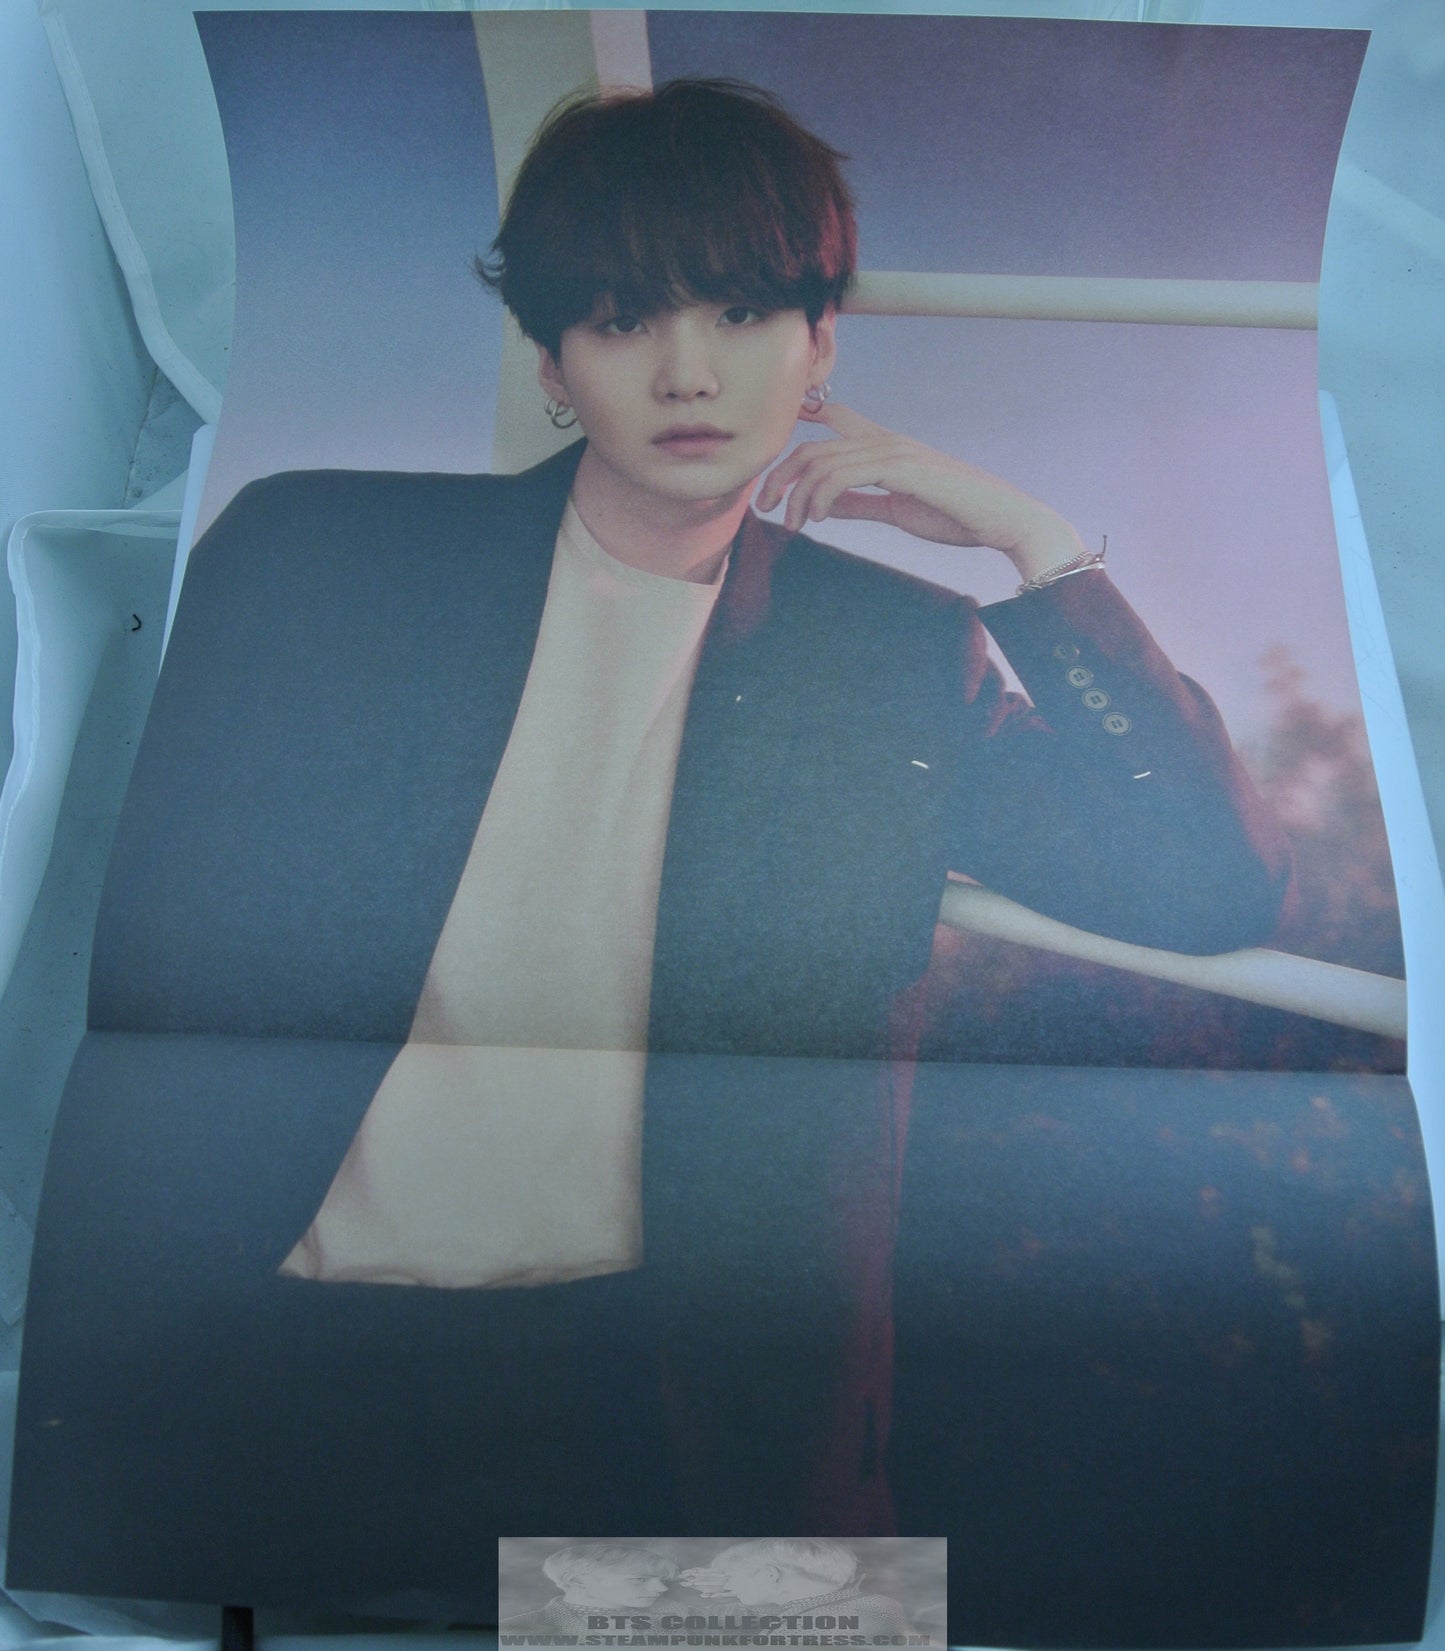 BTS SUGA MIN YOONGI FOLDED POSTER CLOSE LADDER COLOR 11.75" X 16.5" HYBE INSIGHT LIMITED EDITION OFFICIAL MERCHANDISE